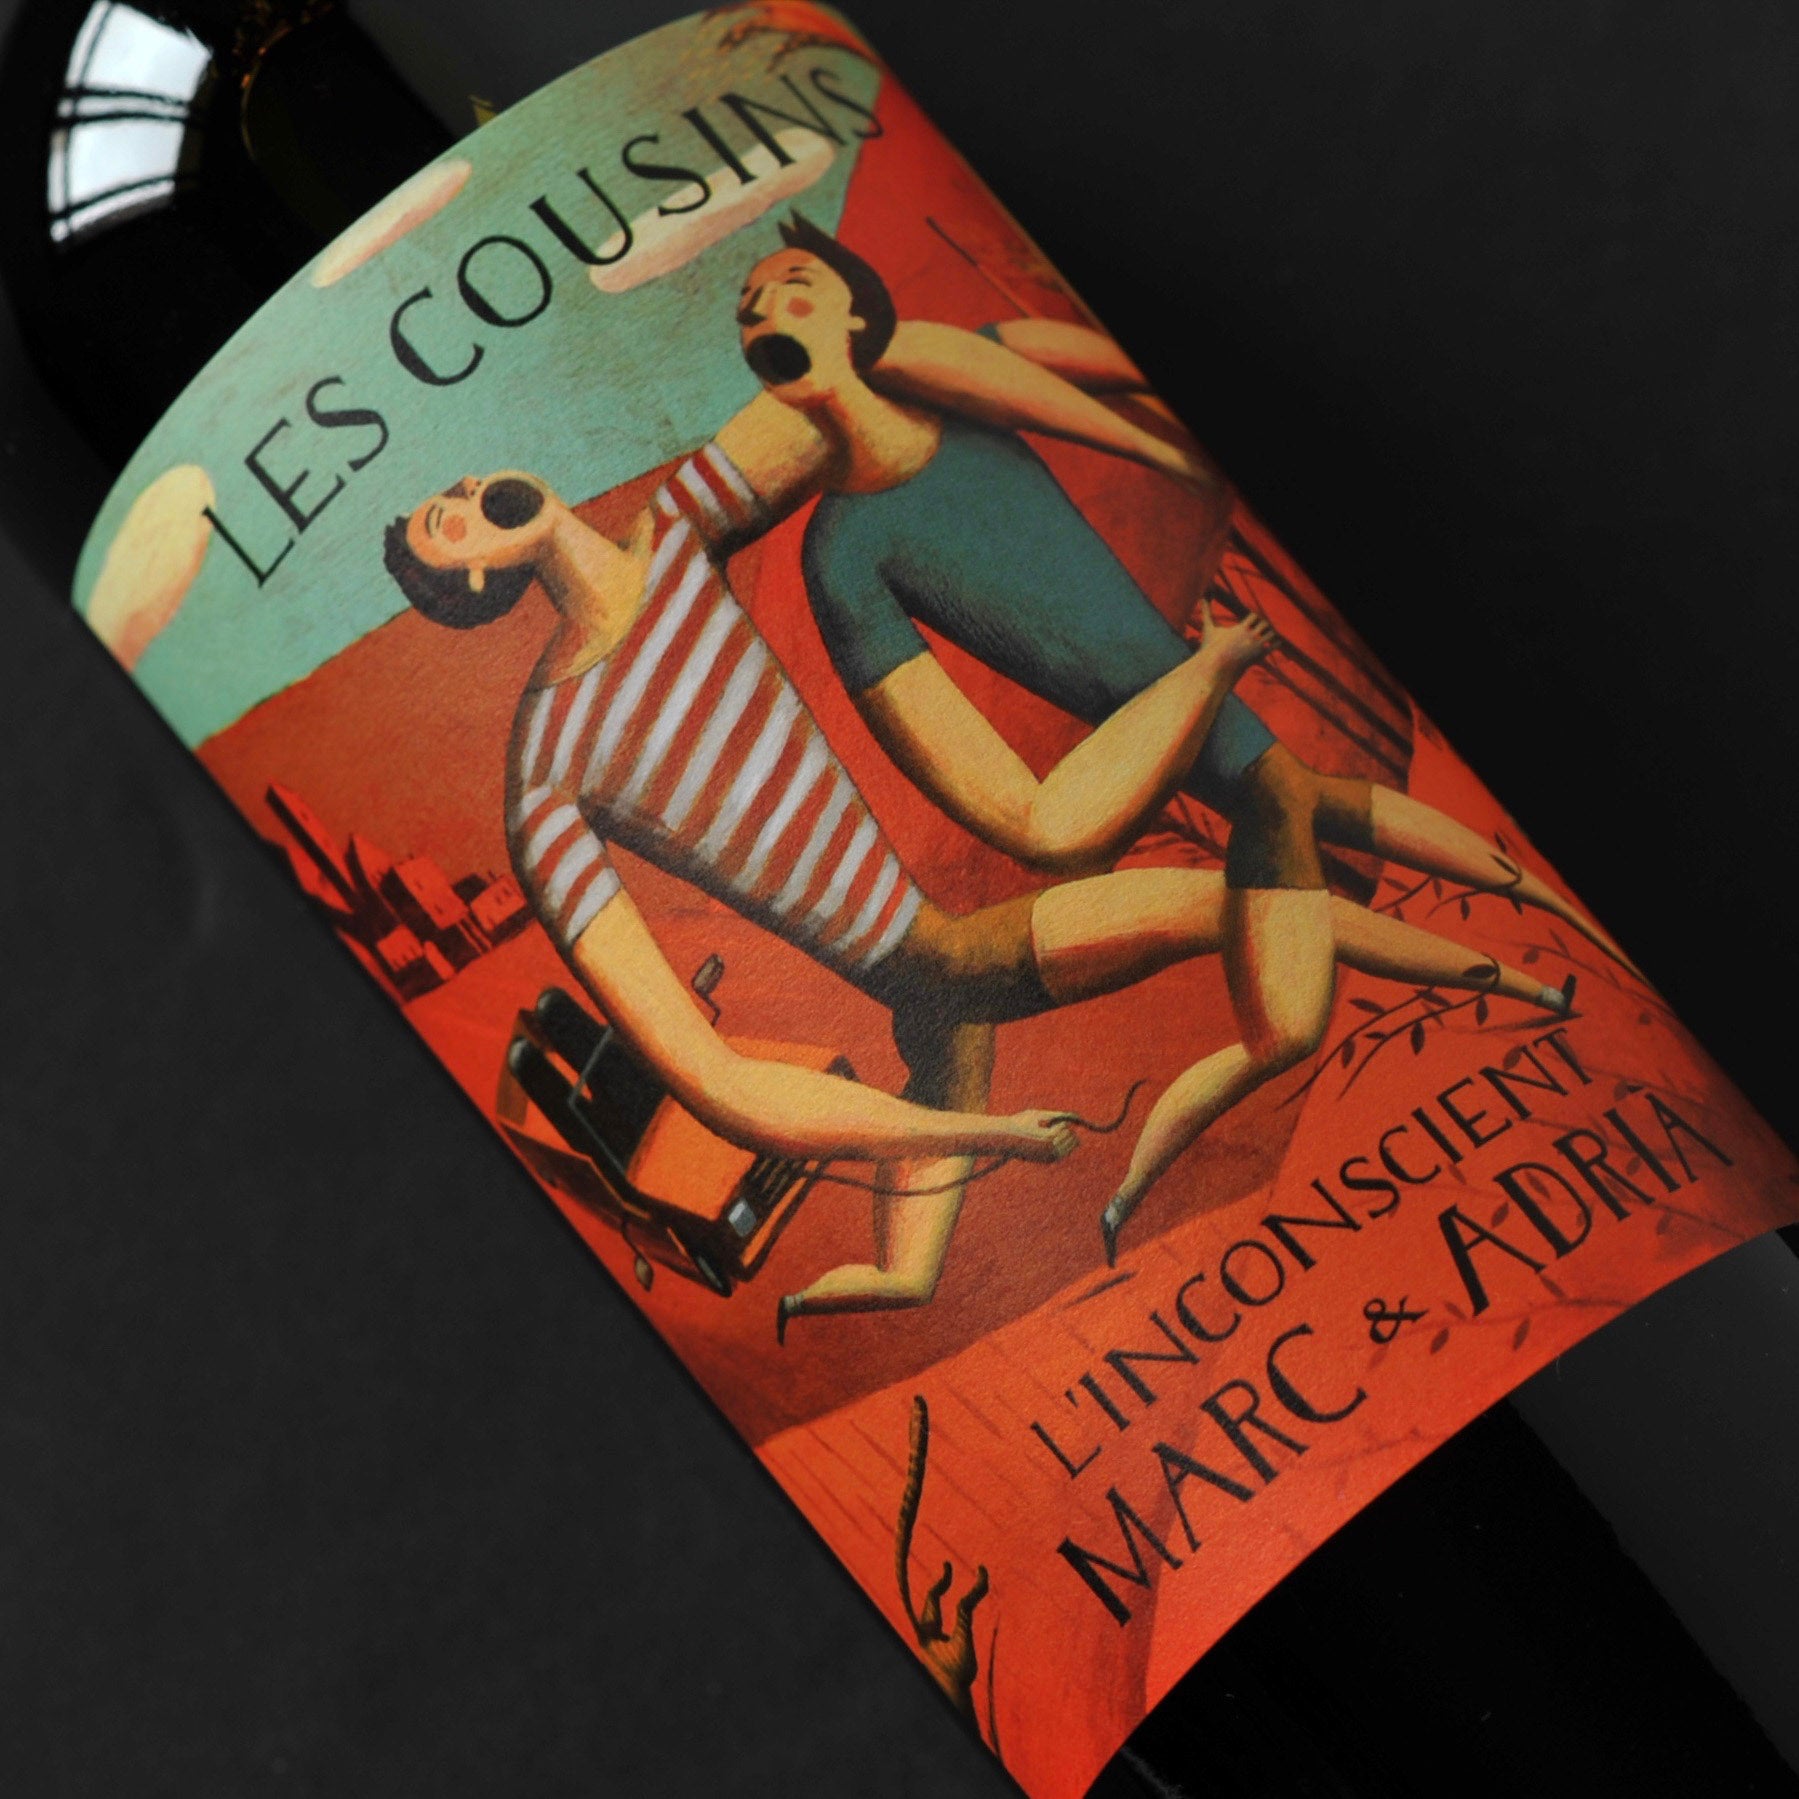 Spanish Red Wine L'Inconscient from Les Cousins Marc & Adria